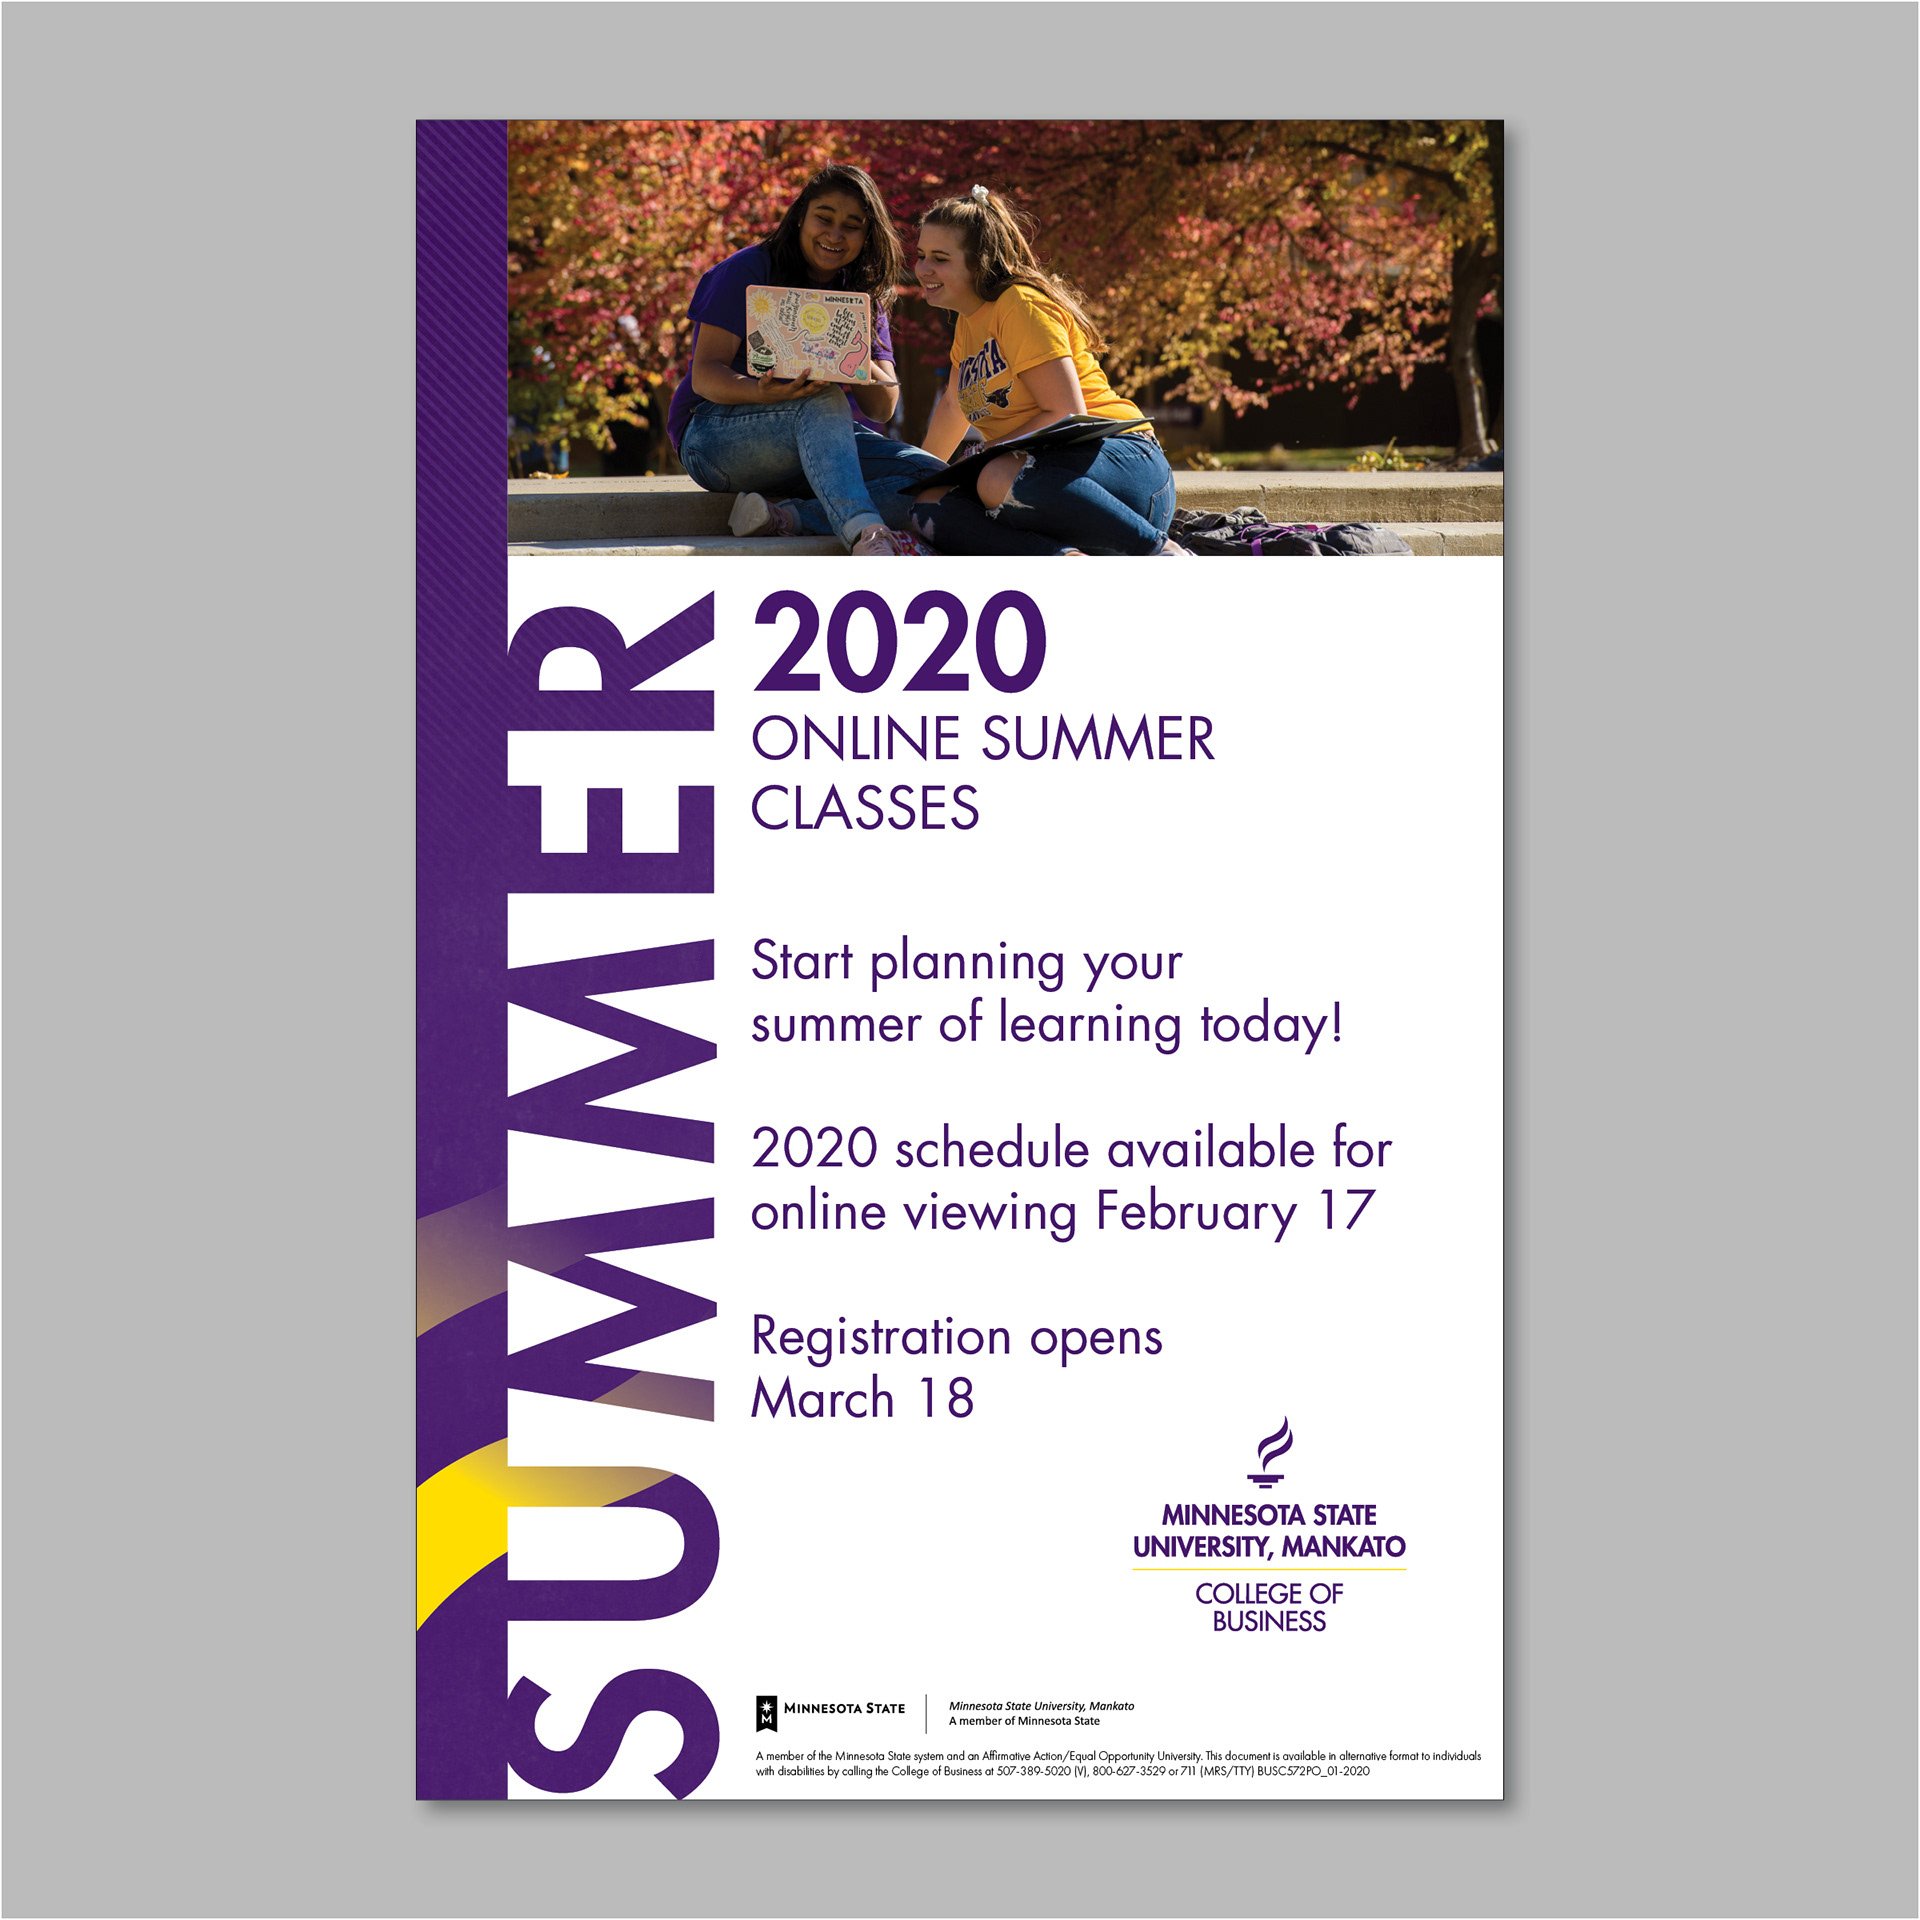 2020 online summer classes, College of Business poster